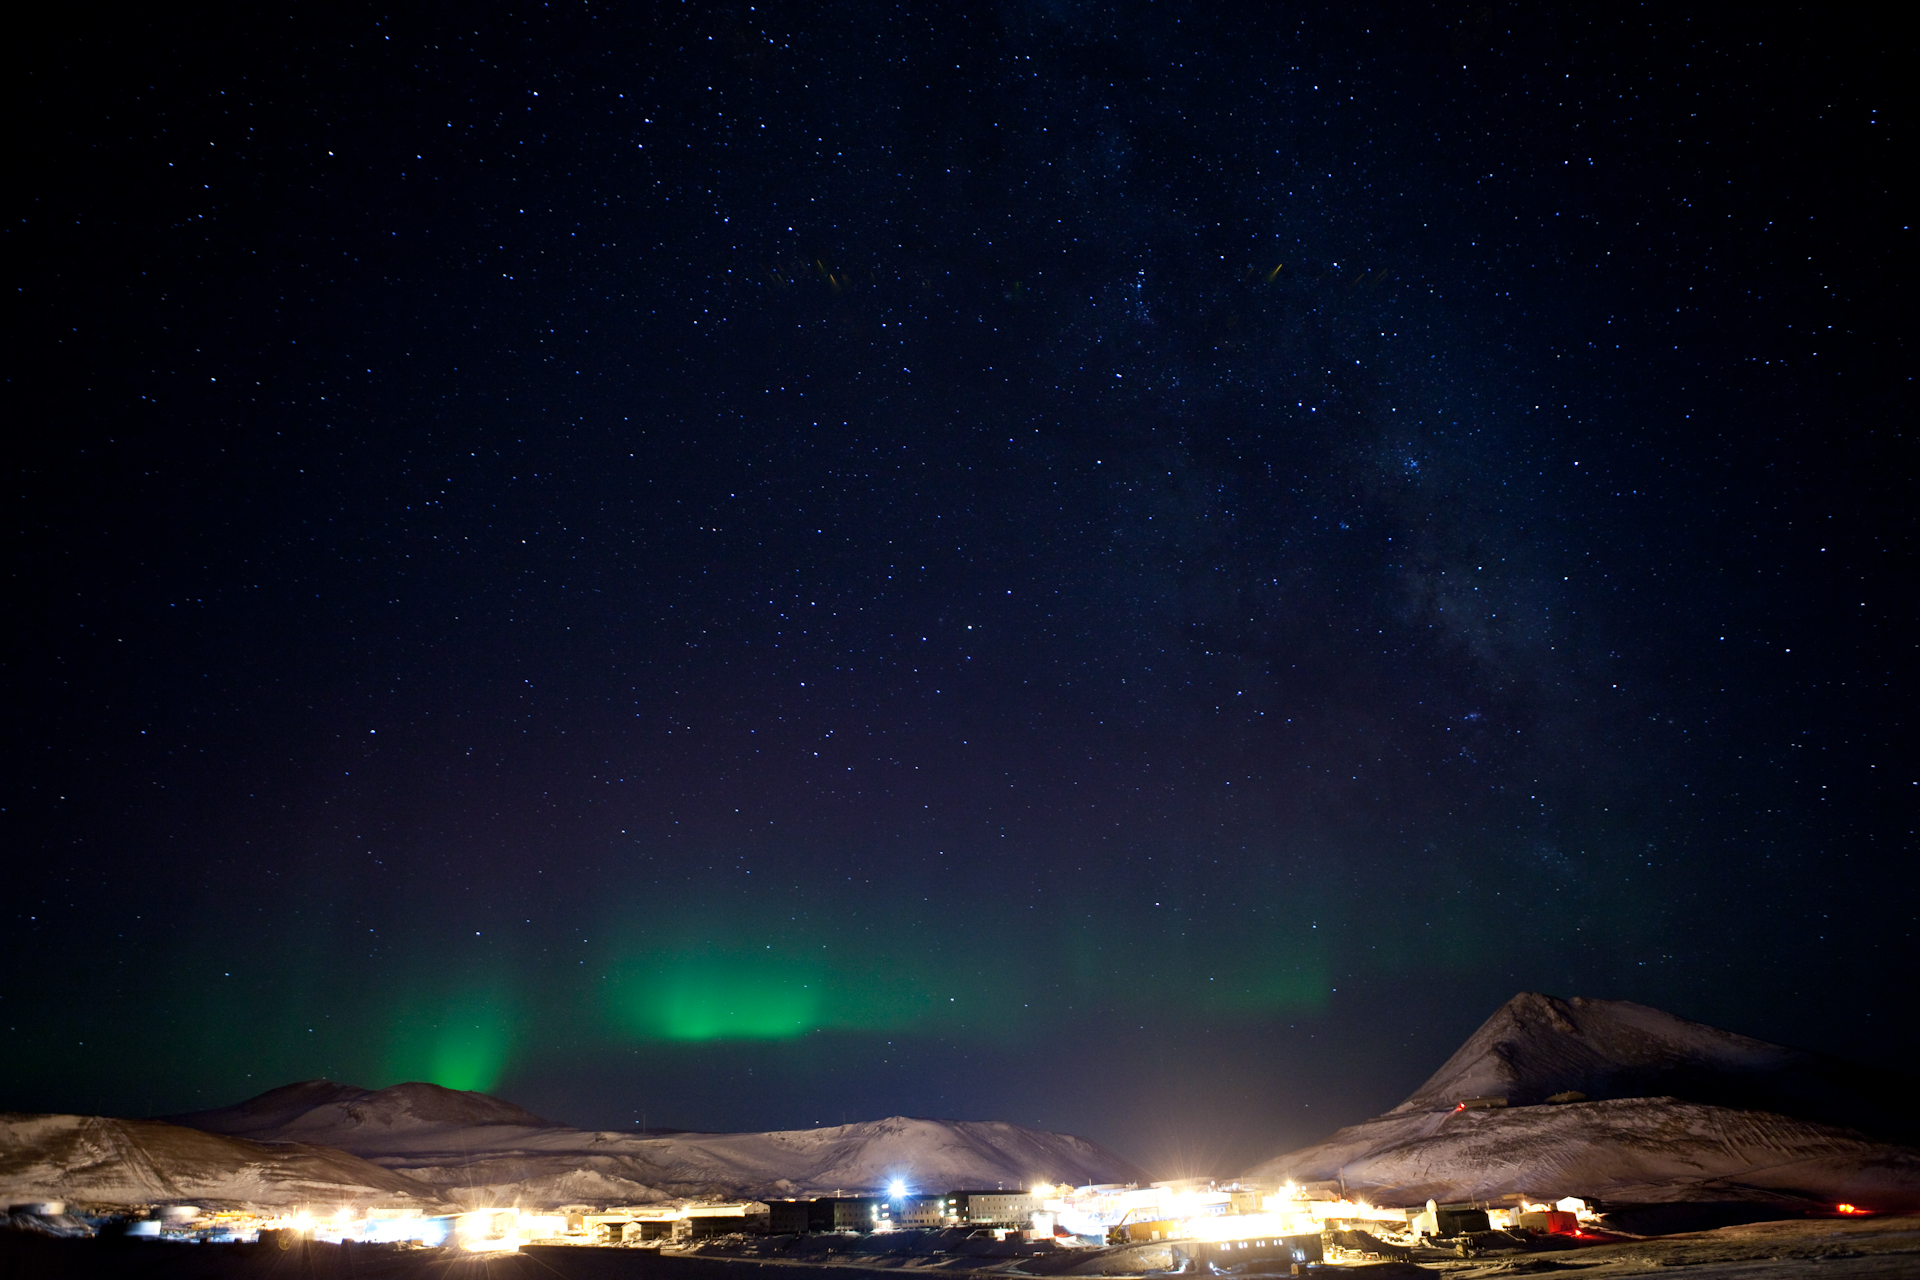 An aurora shines over a brightly lit U.S. research town at night.